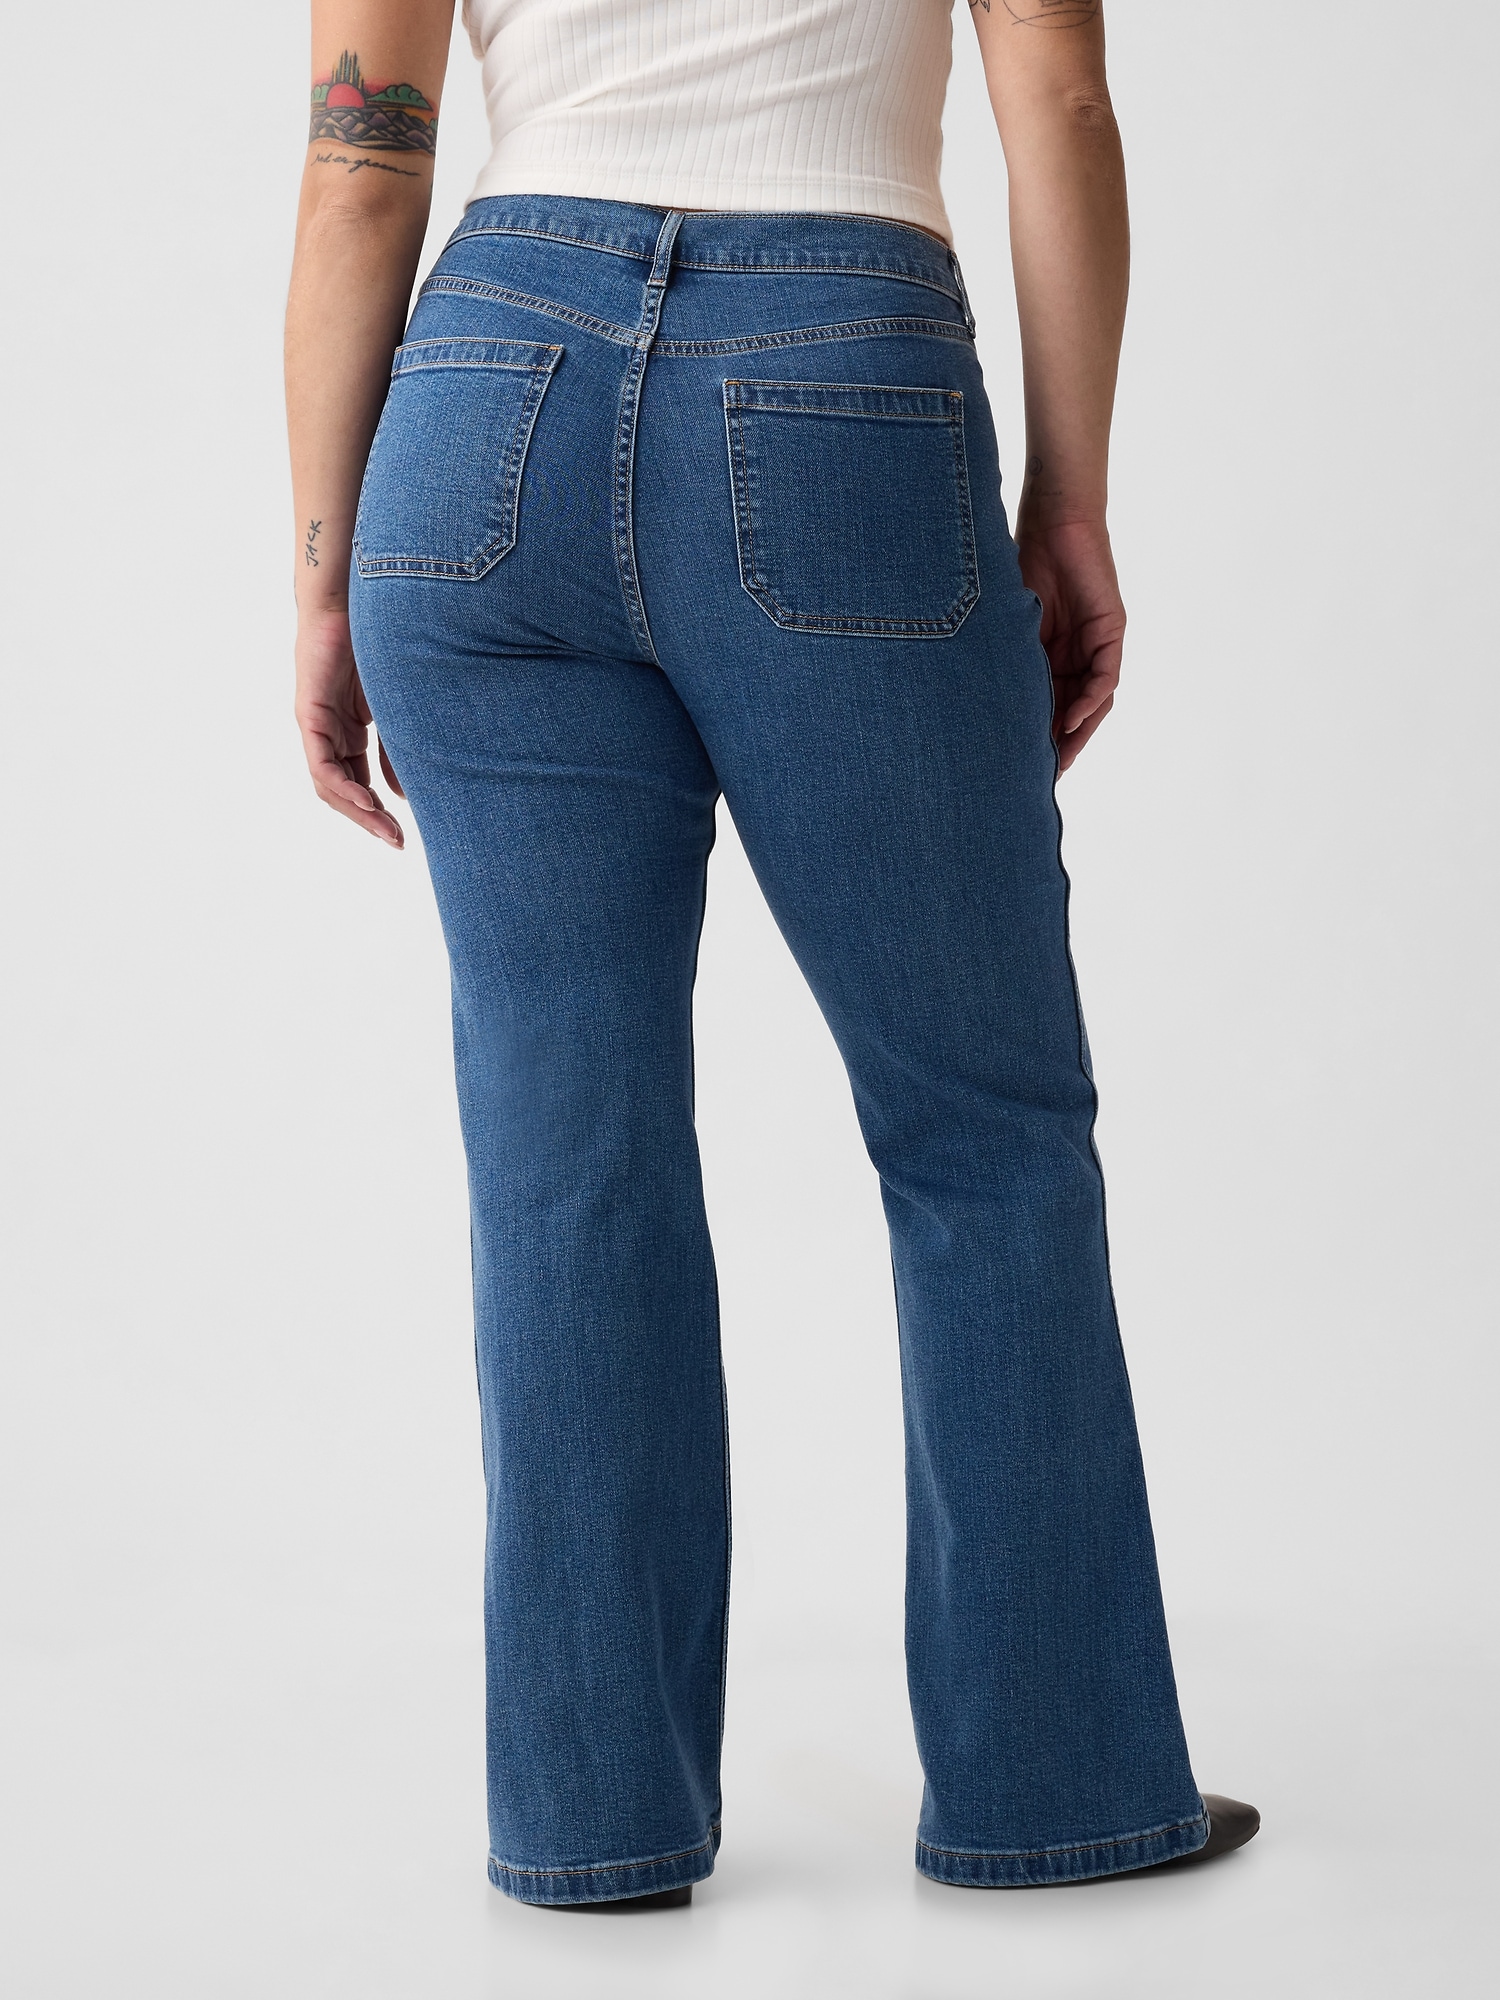 NEW Tall Women's Jeans - 34 Mid-Rise Flare Jean - 26 (2) / Ladies' 34